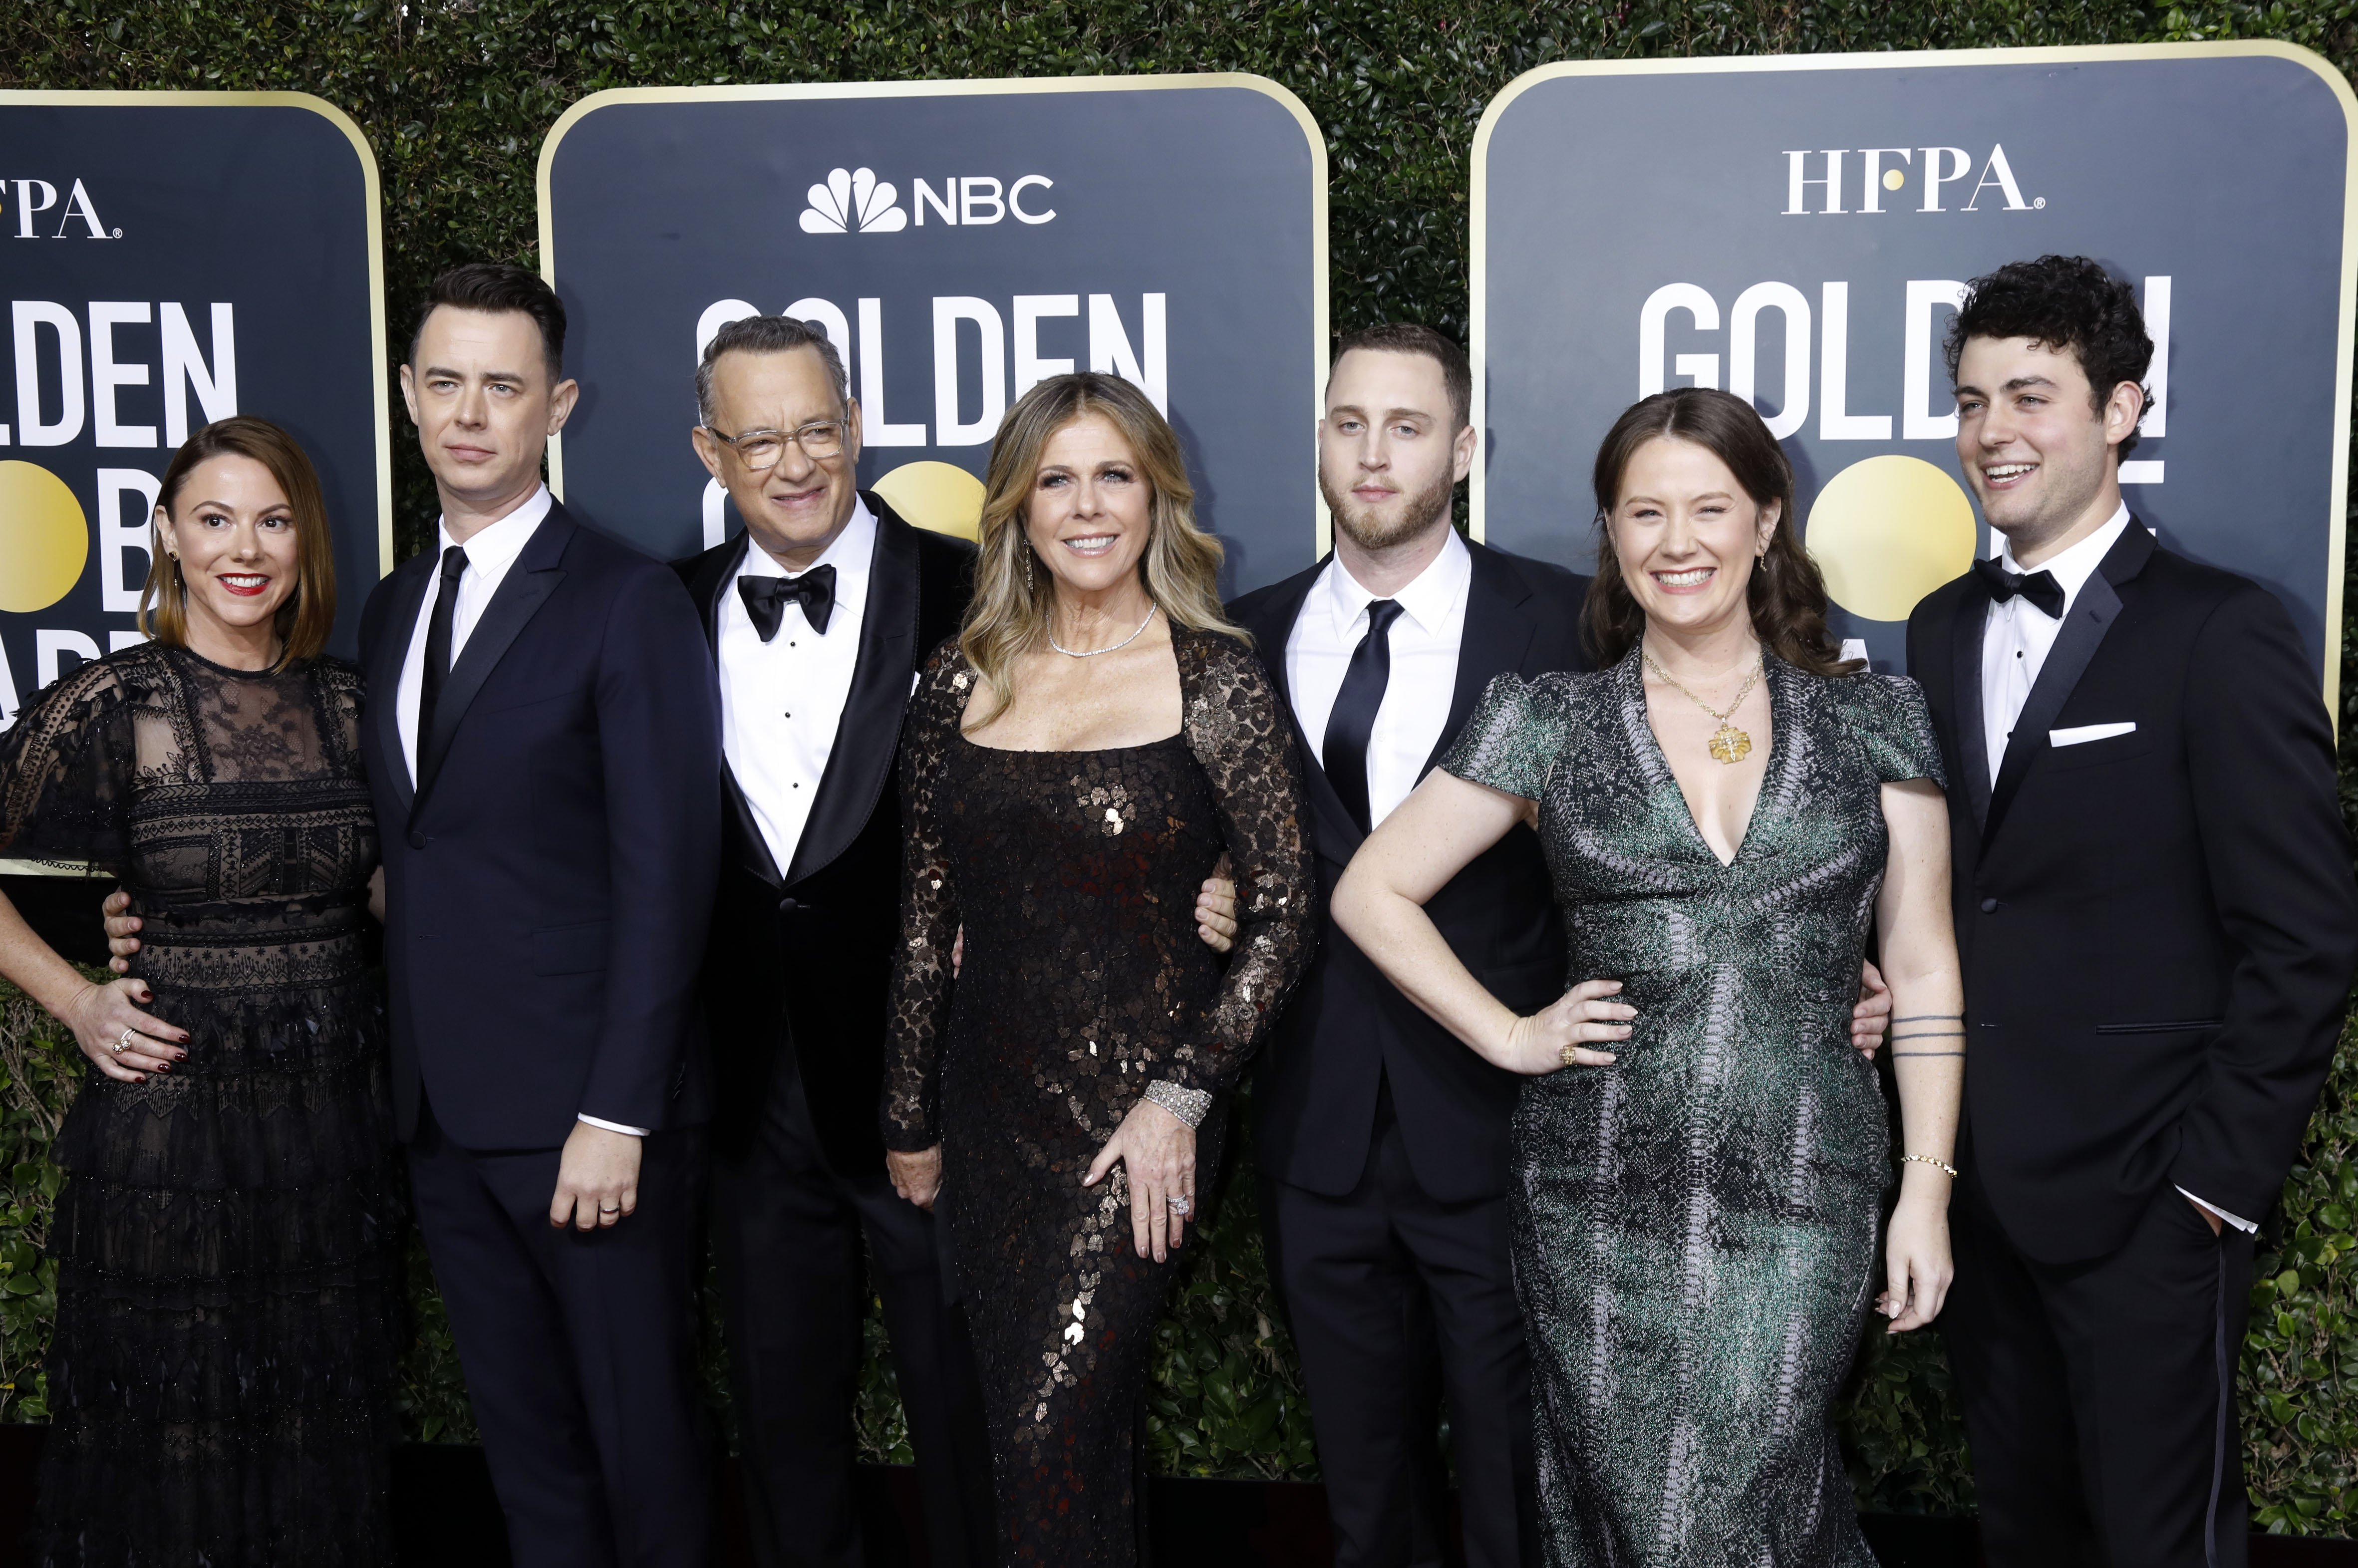 Samantha Bryant, Colin Hanks, Rita Wilson, Tom Hanks, Elizabeth Ann Hanks, Chet Hanks, and Truman Theodore Hanks photographed on the red carpet of the 77th Annual Golden Globe Awards at The Beverly Hilton Hotel on January 05, 2020 in Beverly Hills, California | Source: Getty Images